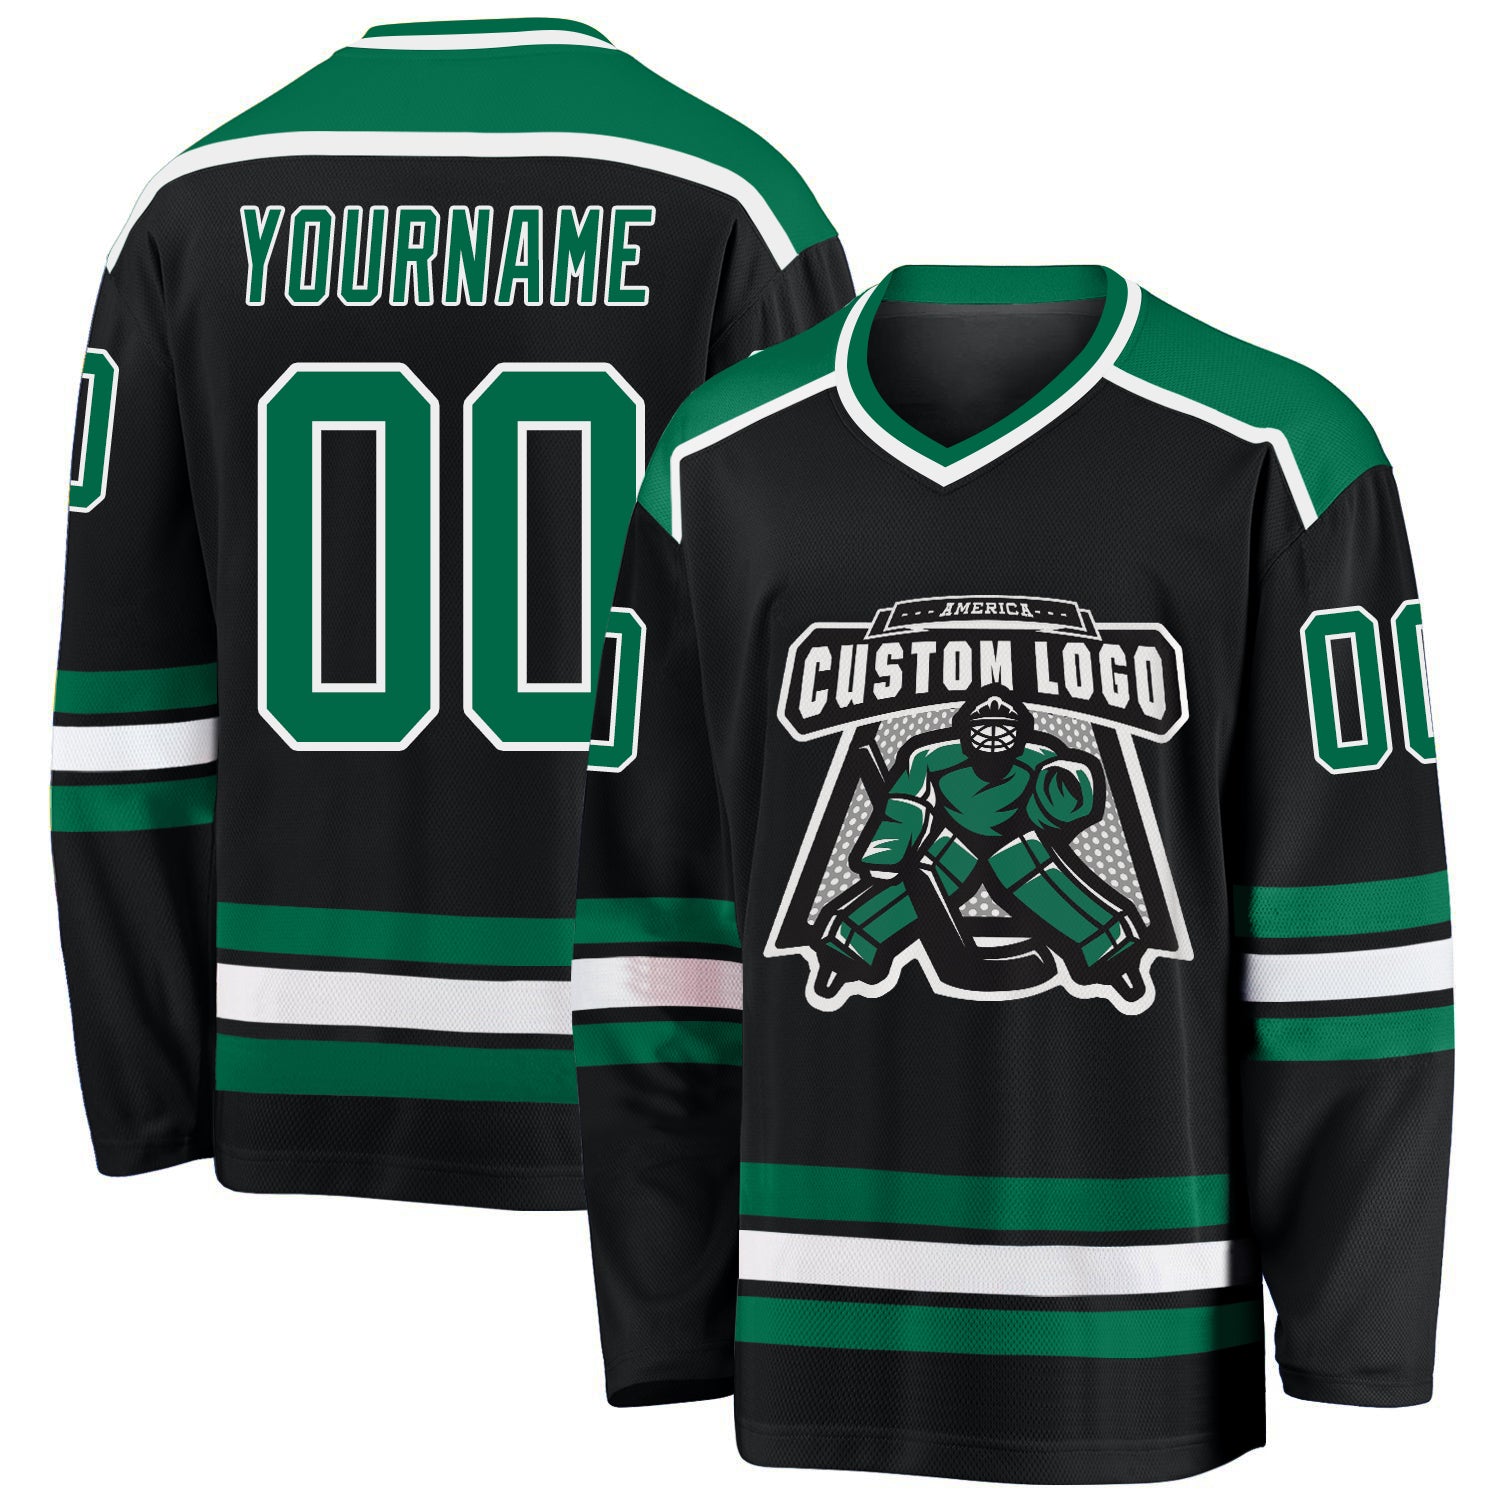 Custom Mighty Ducks Hockey Jersey White Black Green Toddler/Youth/Adult  Size